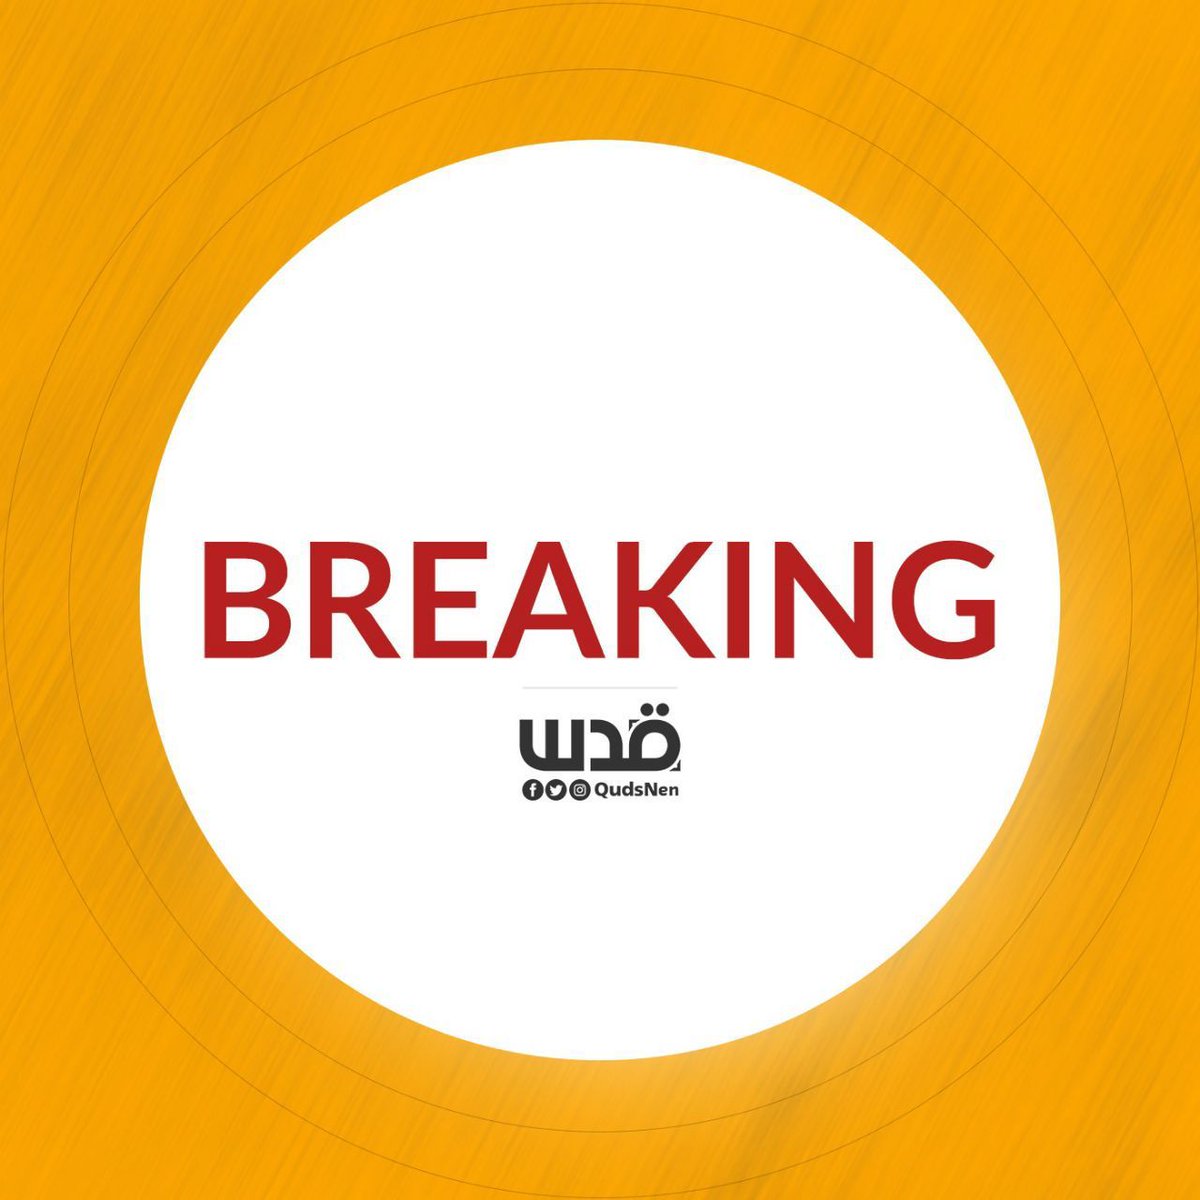 BREAKING| According to local sources, Israel's military in Jabalia is deploying quadcopters emitting sounds of Takbirs, ululation, crying babies, and women's screams to lure residents then shoot them.